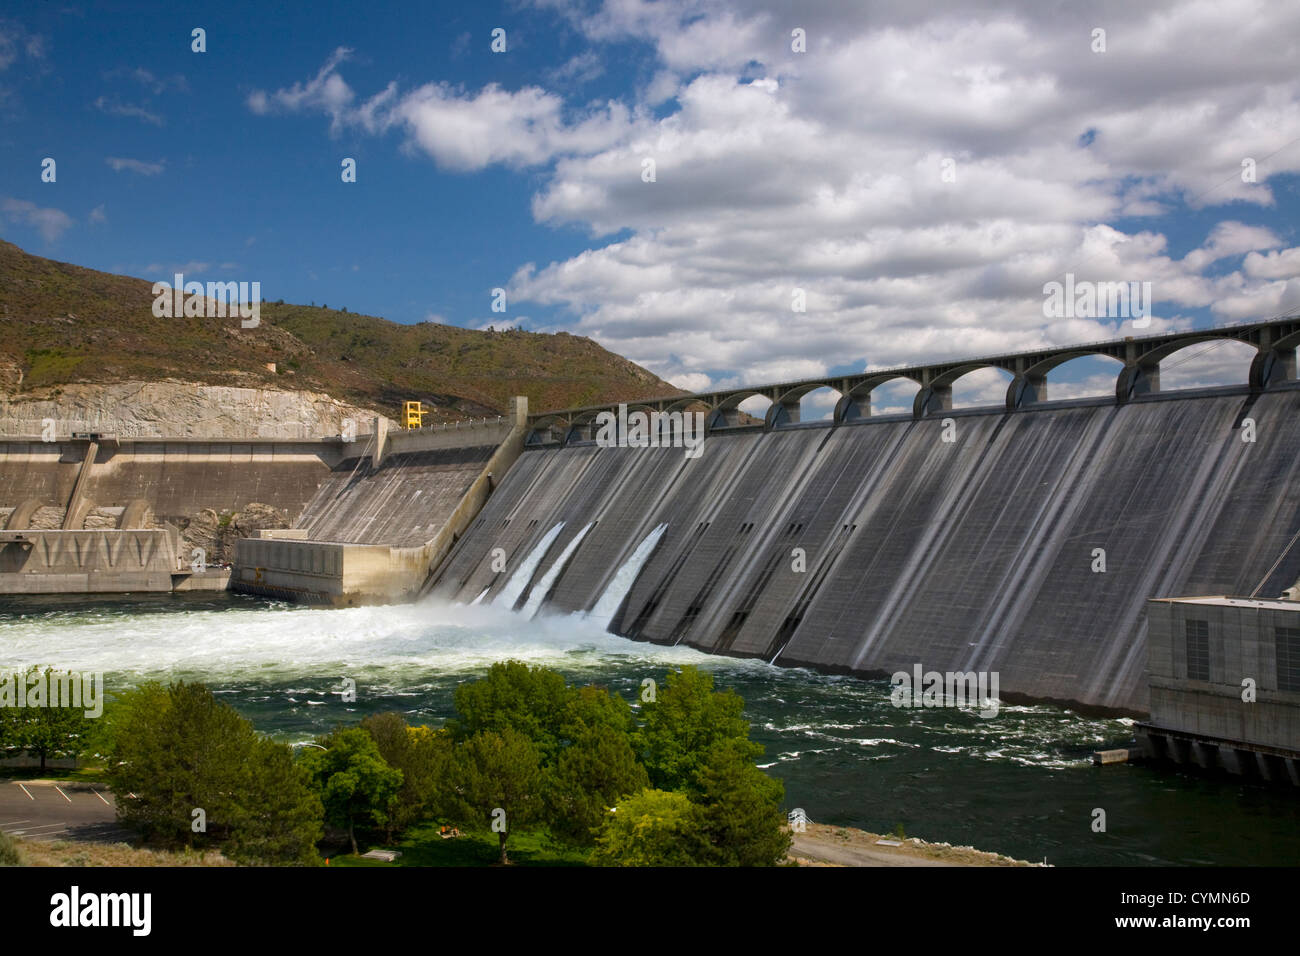 WA05611-00...WASHINGTON - Grand Coulee Dam and three power houses on the Columbia River. Stock Photo